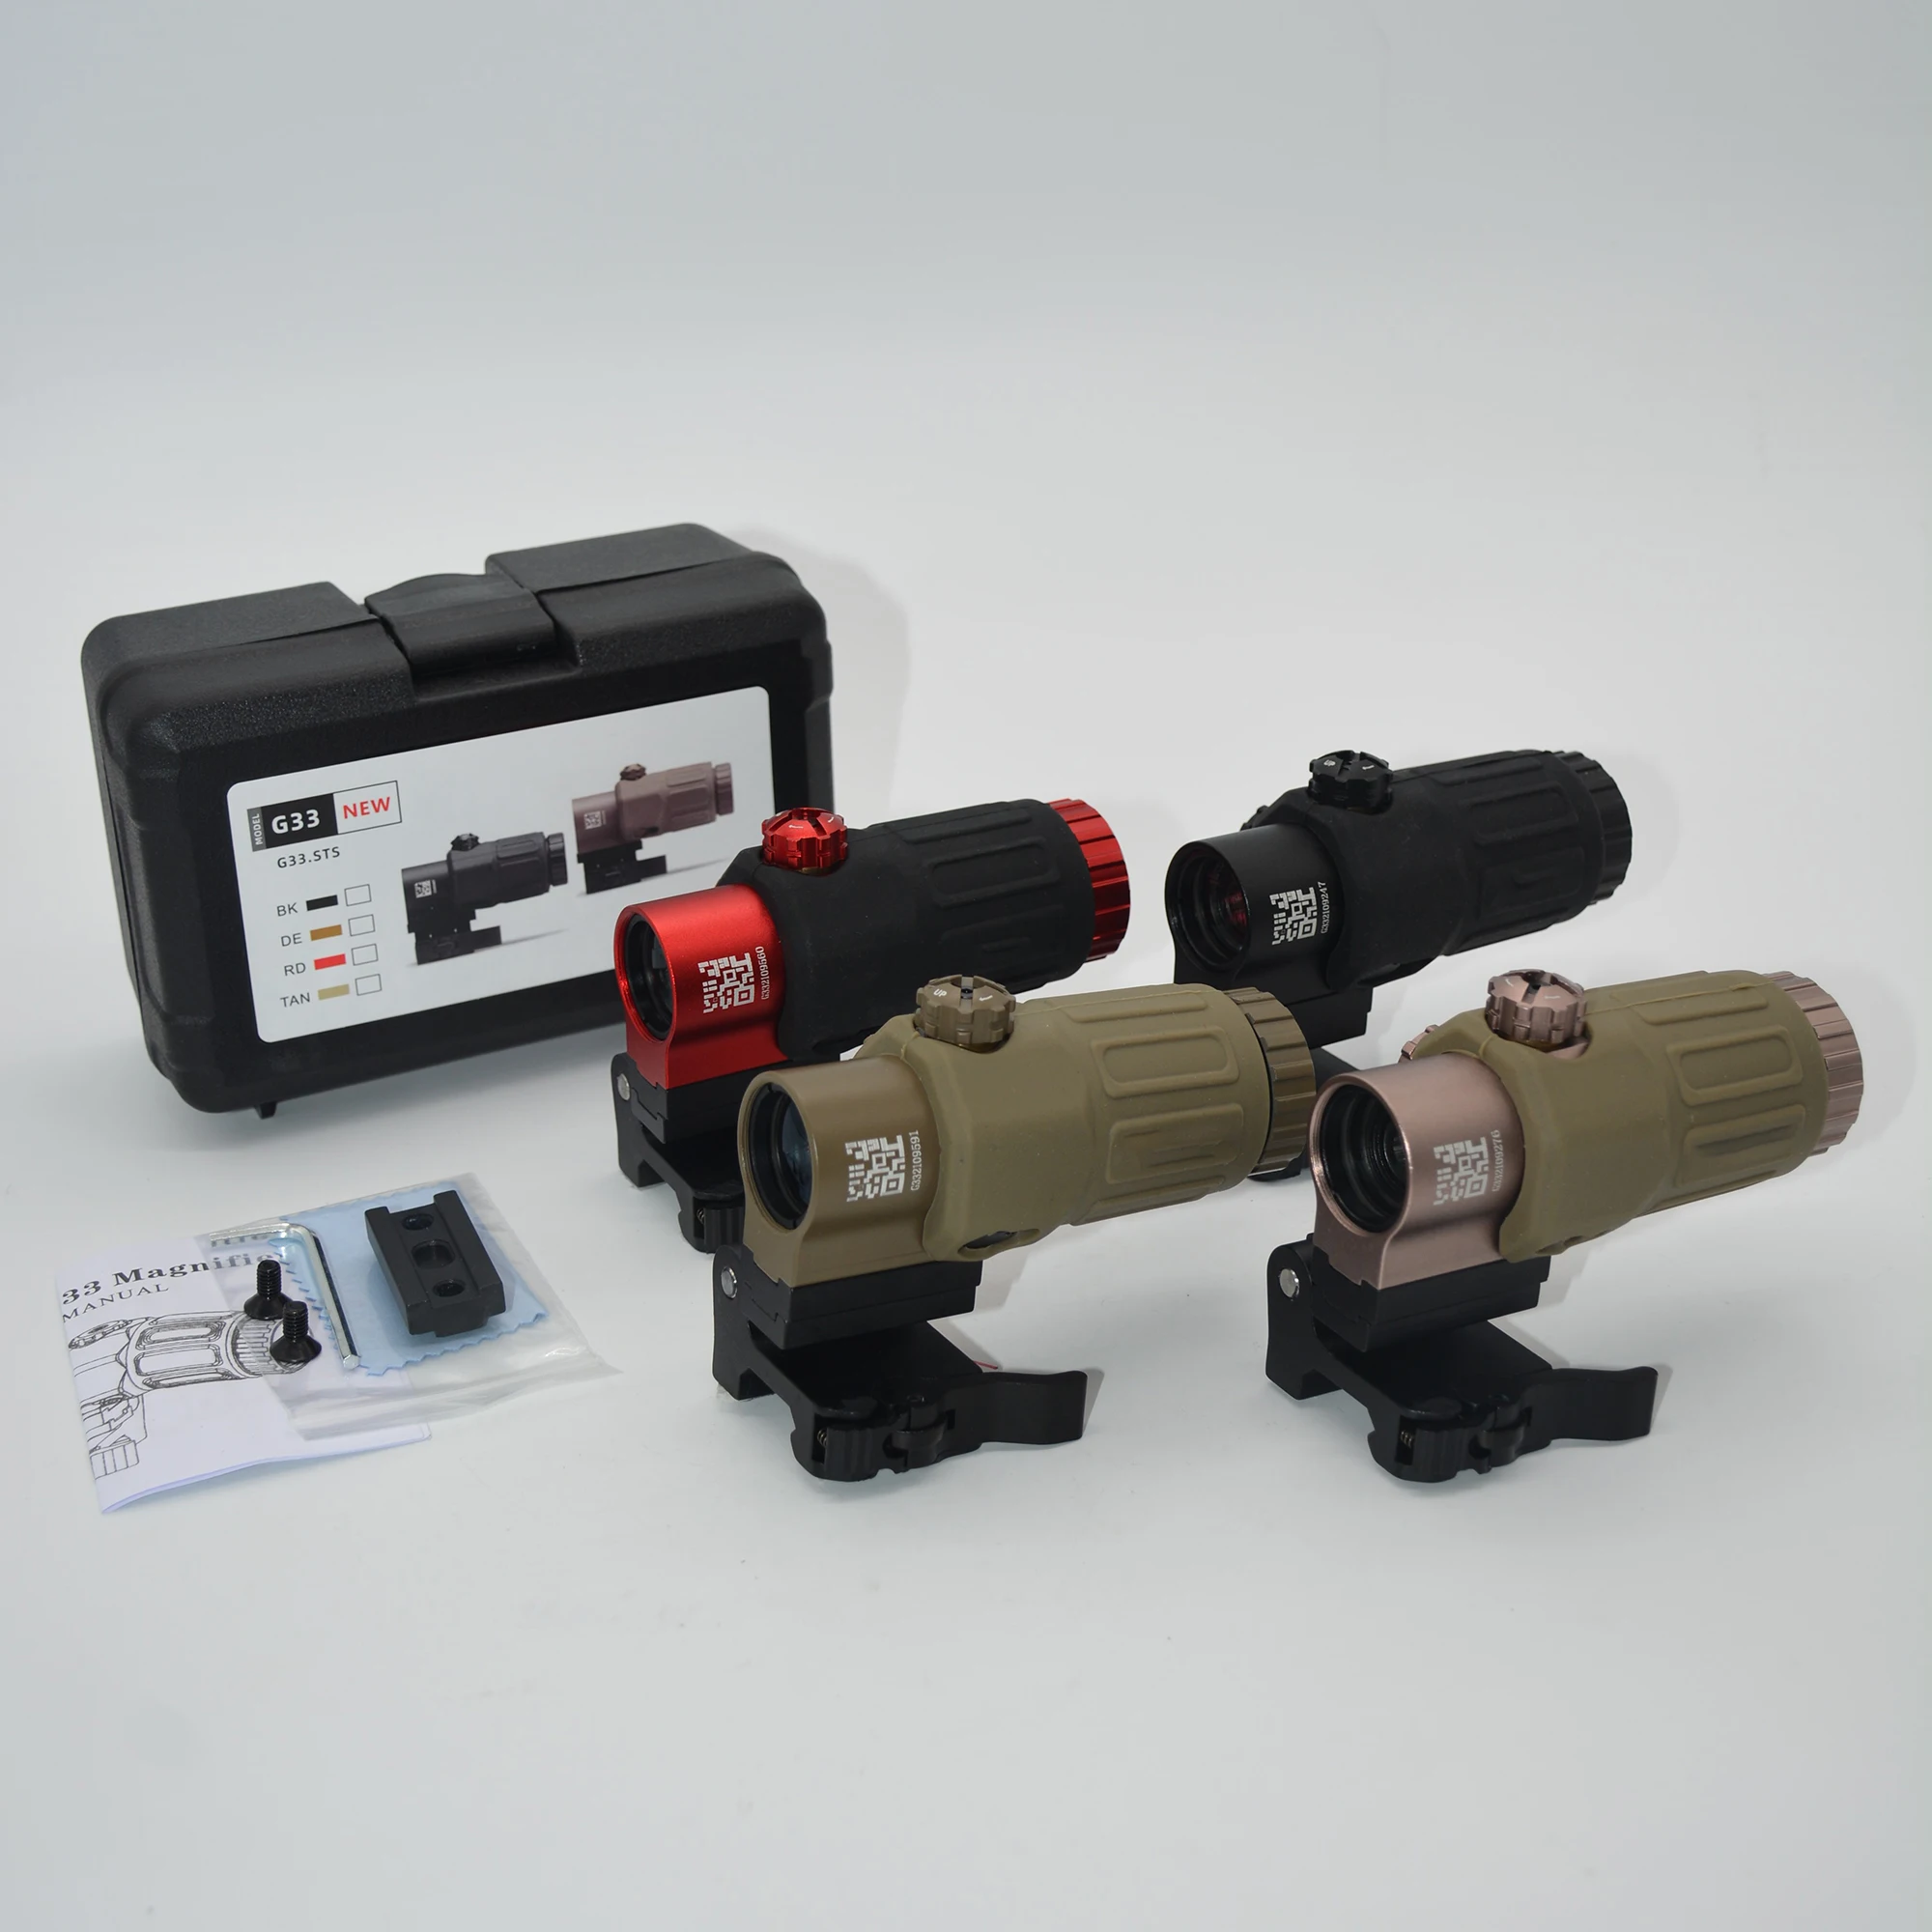 

Tacitical G33 Magnifier Sight 3X with Switch to Side Qick Detach QD Mount for Hunting with Full Markings